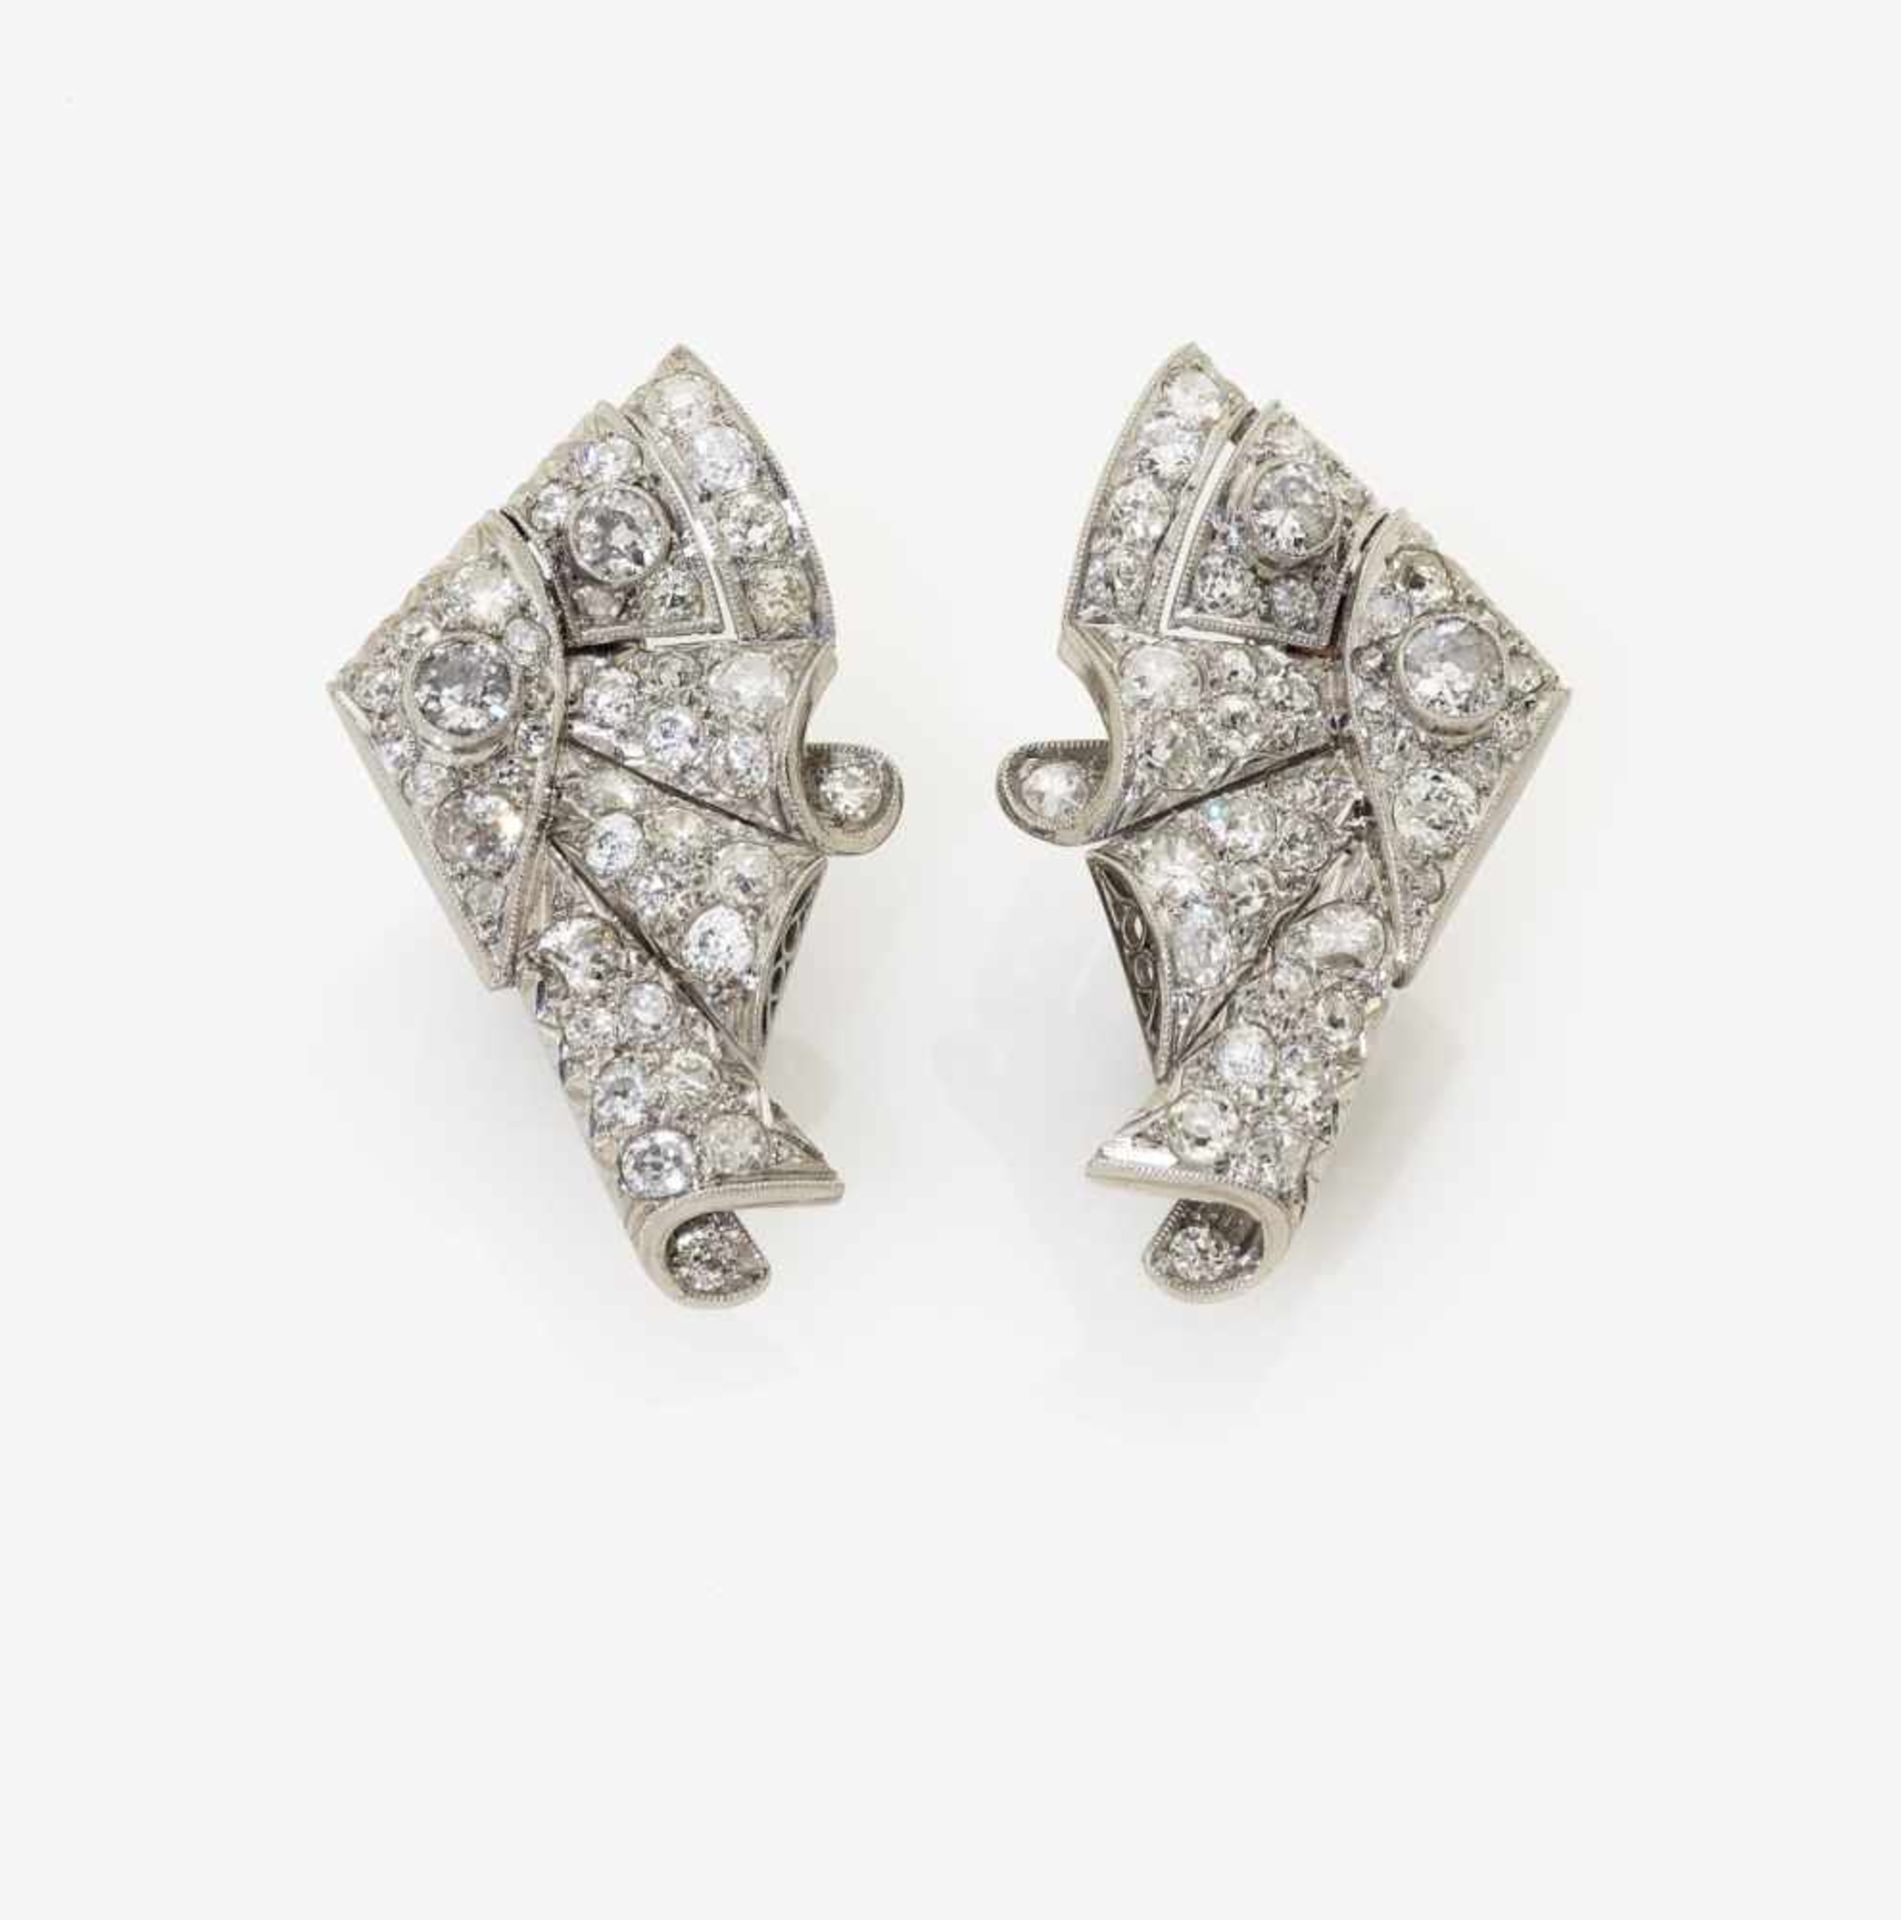 A Pair of Diamond Ear ClipsUSA, 1940-1950s Platinum 950/-, tested. 82 old-cut diamonds, together